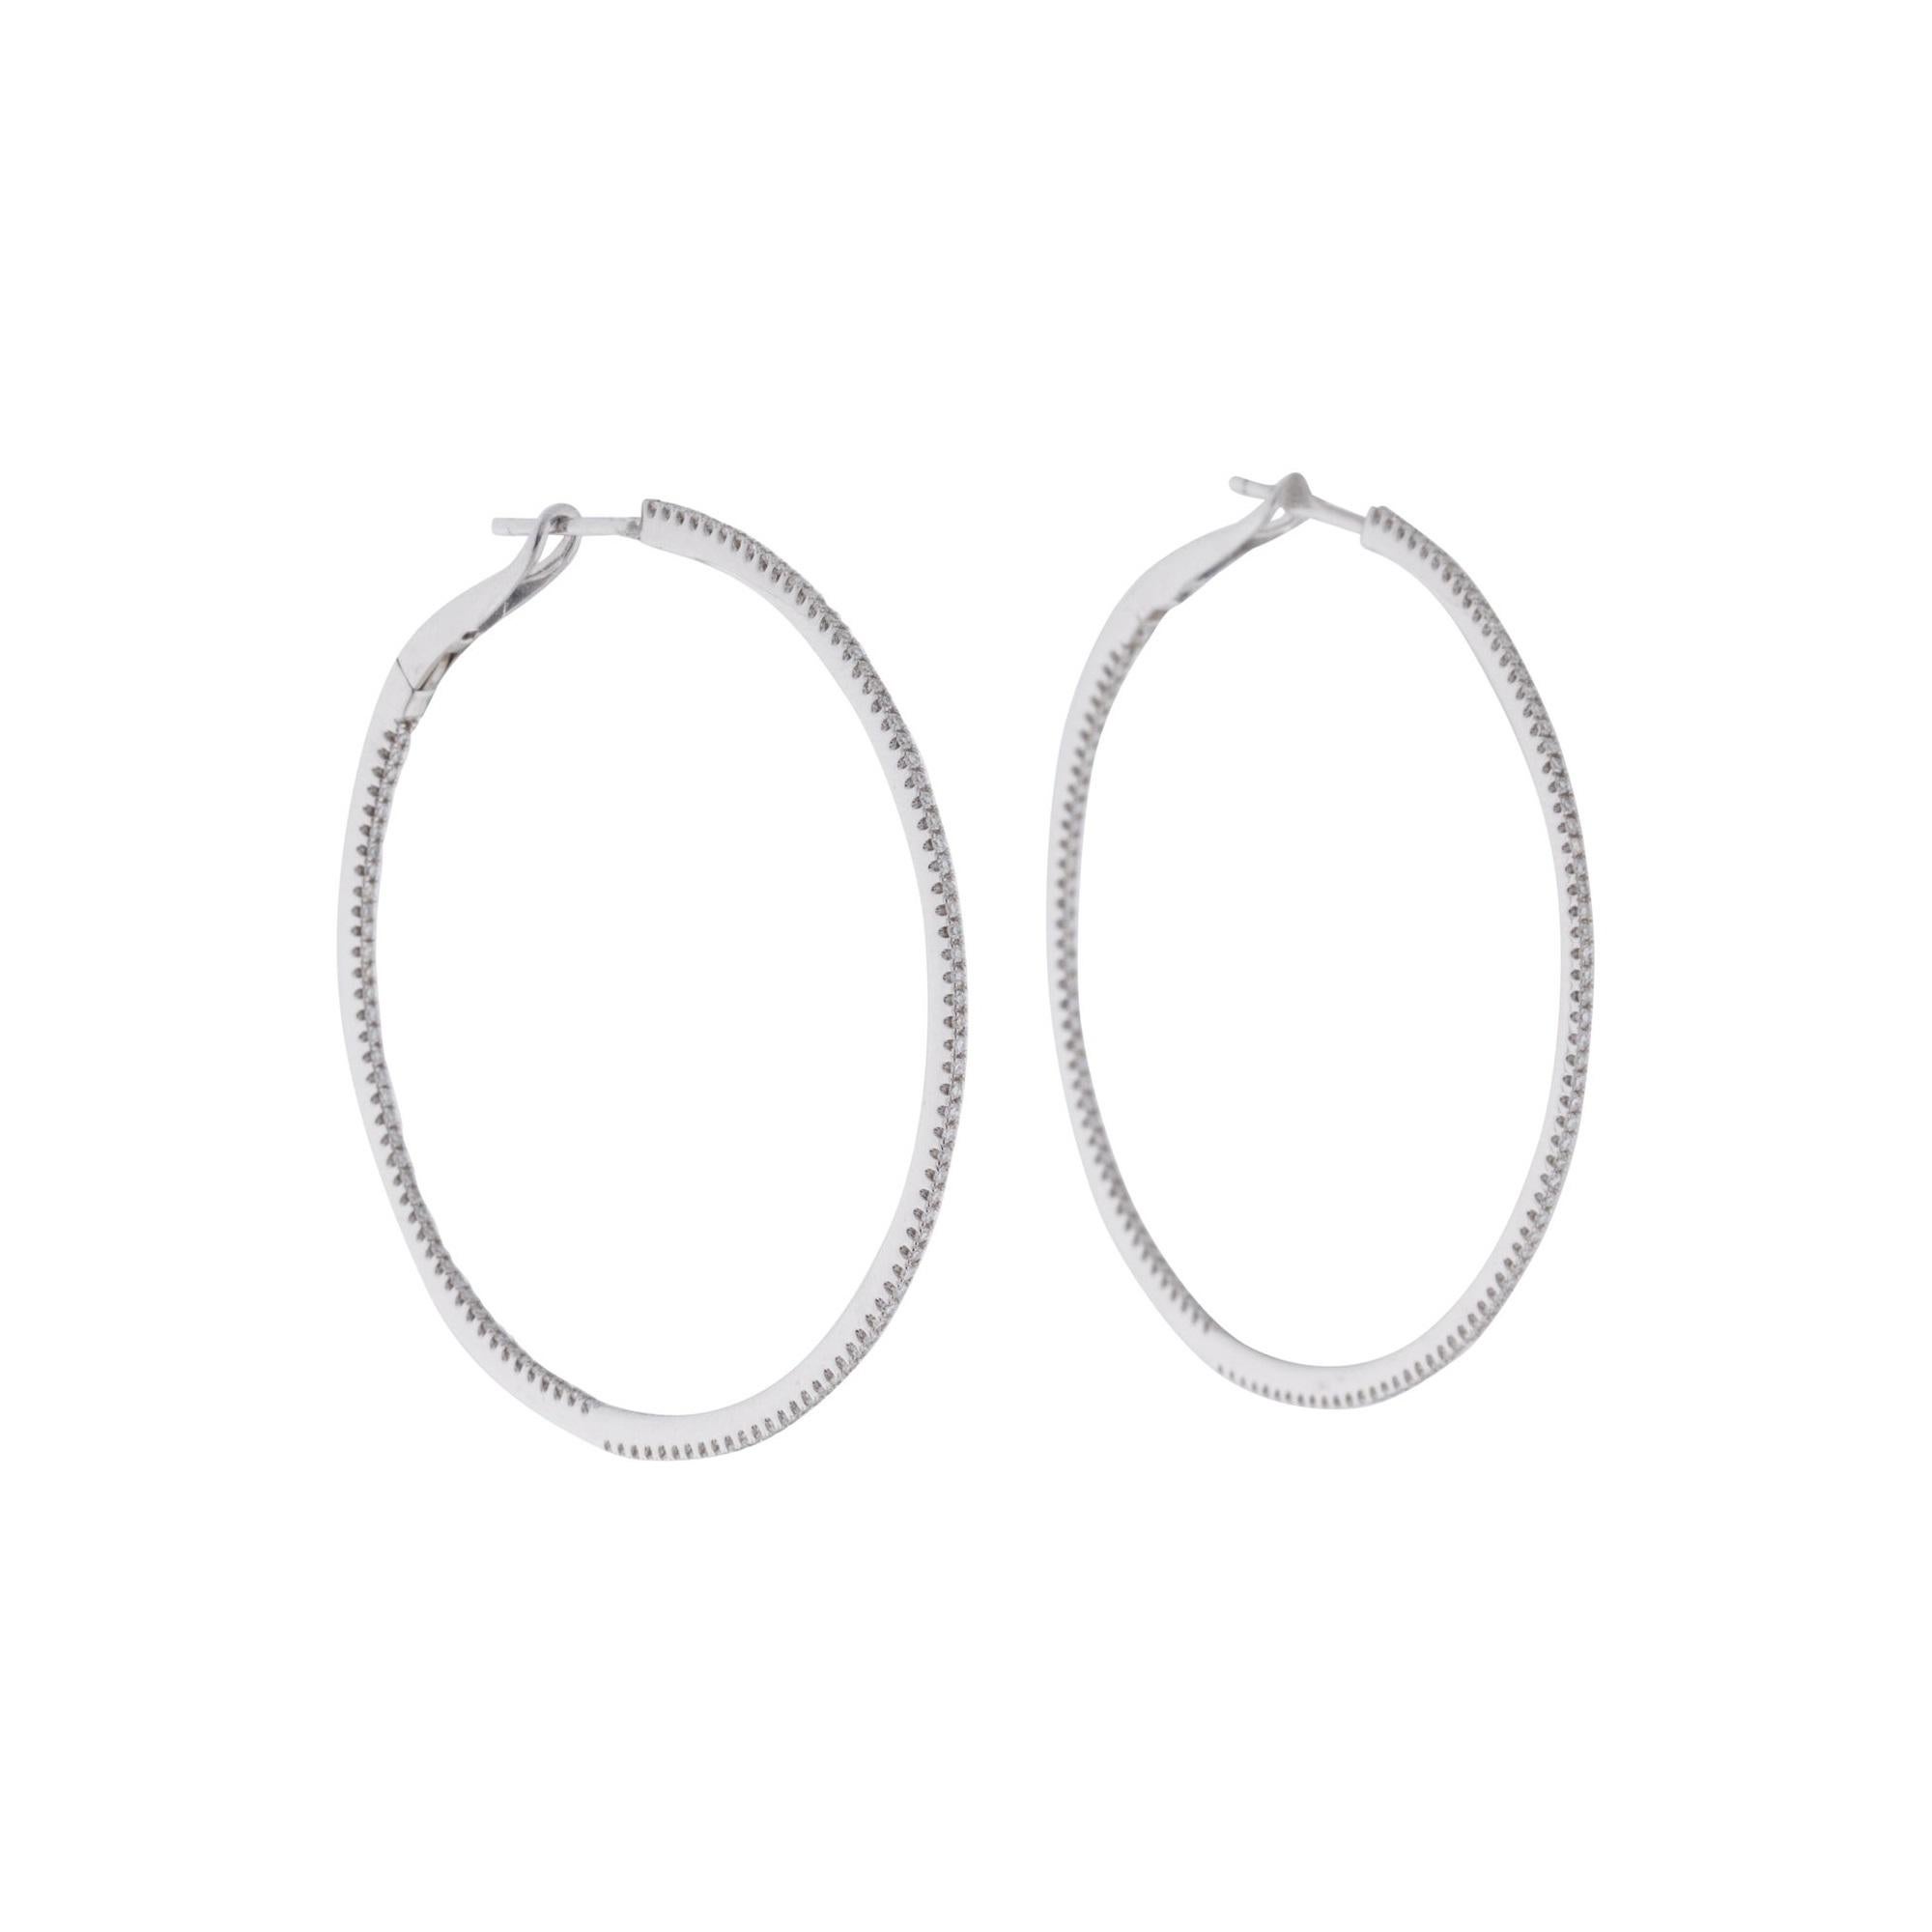 Light up your favorite looks with the brilliance of diamonds! Shimmering and bright, these gorgeous narrow round hoops glisten with approximately 0.59ct diamonds along the outer edge. Diamond color and clarity is GH SI1-SI2. Lever backs provide a